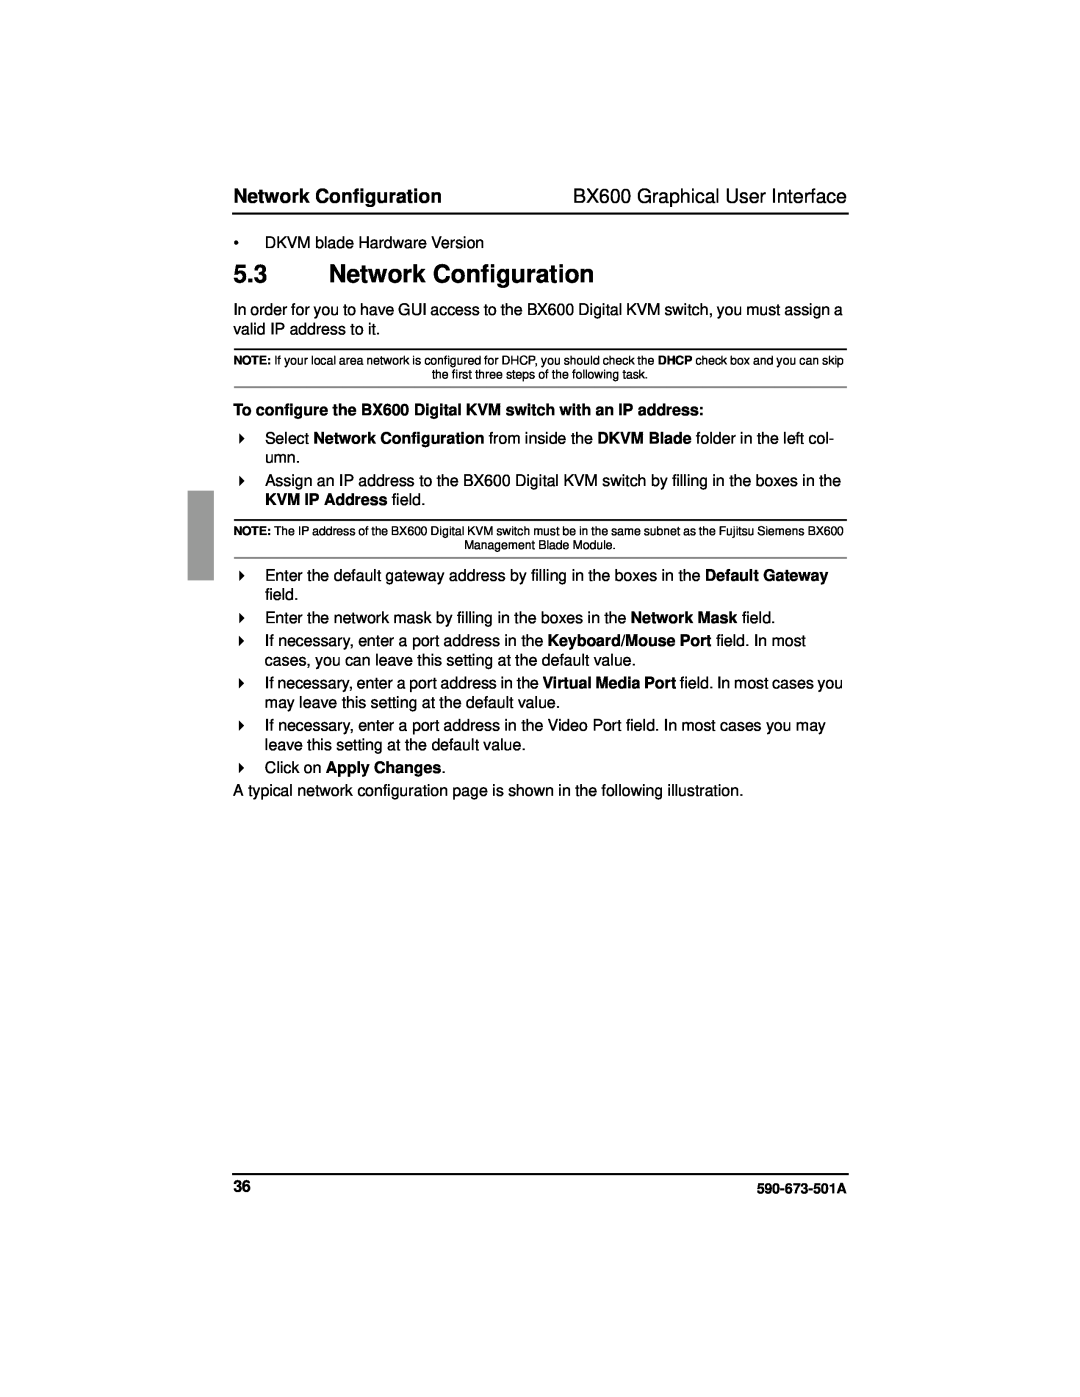 Fujitsu Siemens Computers manual Network Configuration, BX600 Graphical User Interface, Click on Apply Changes 